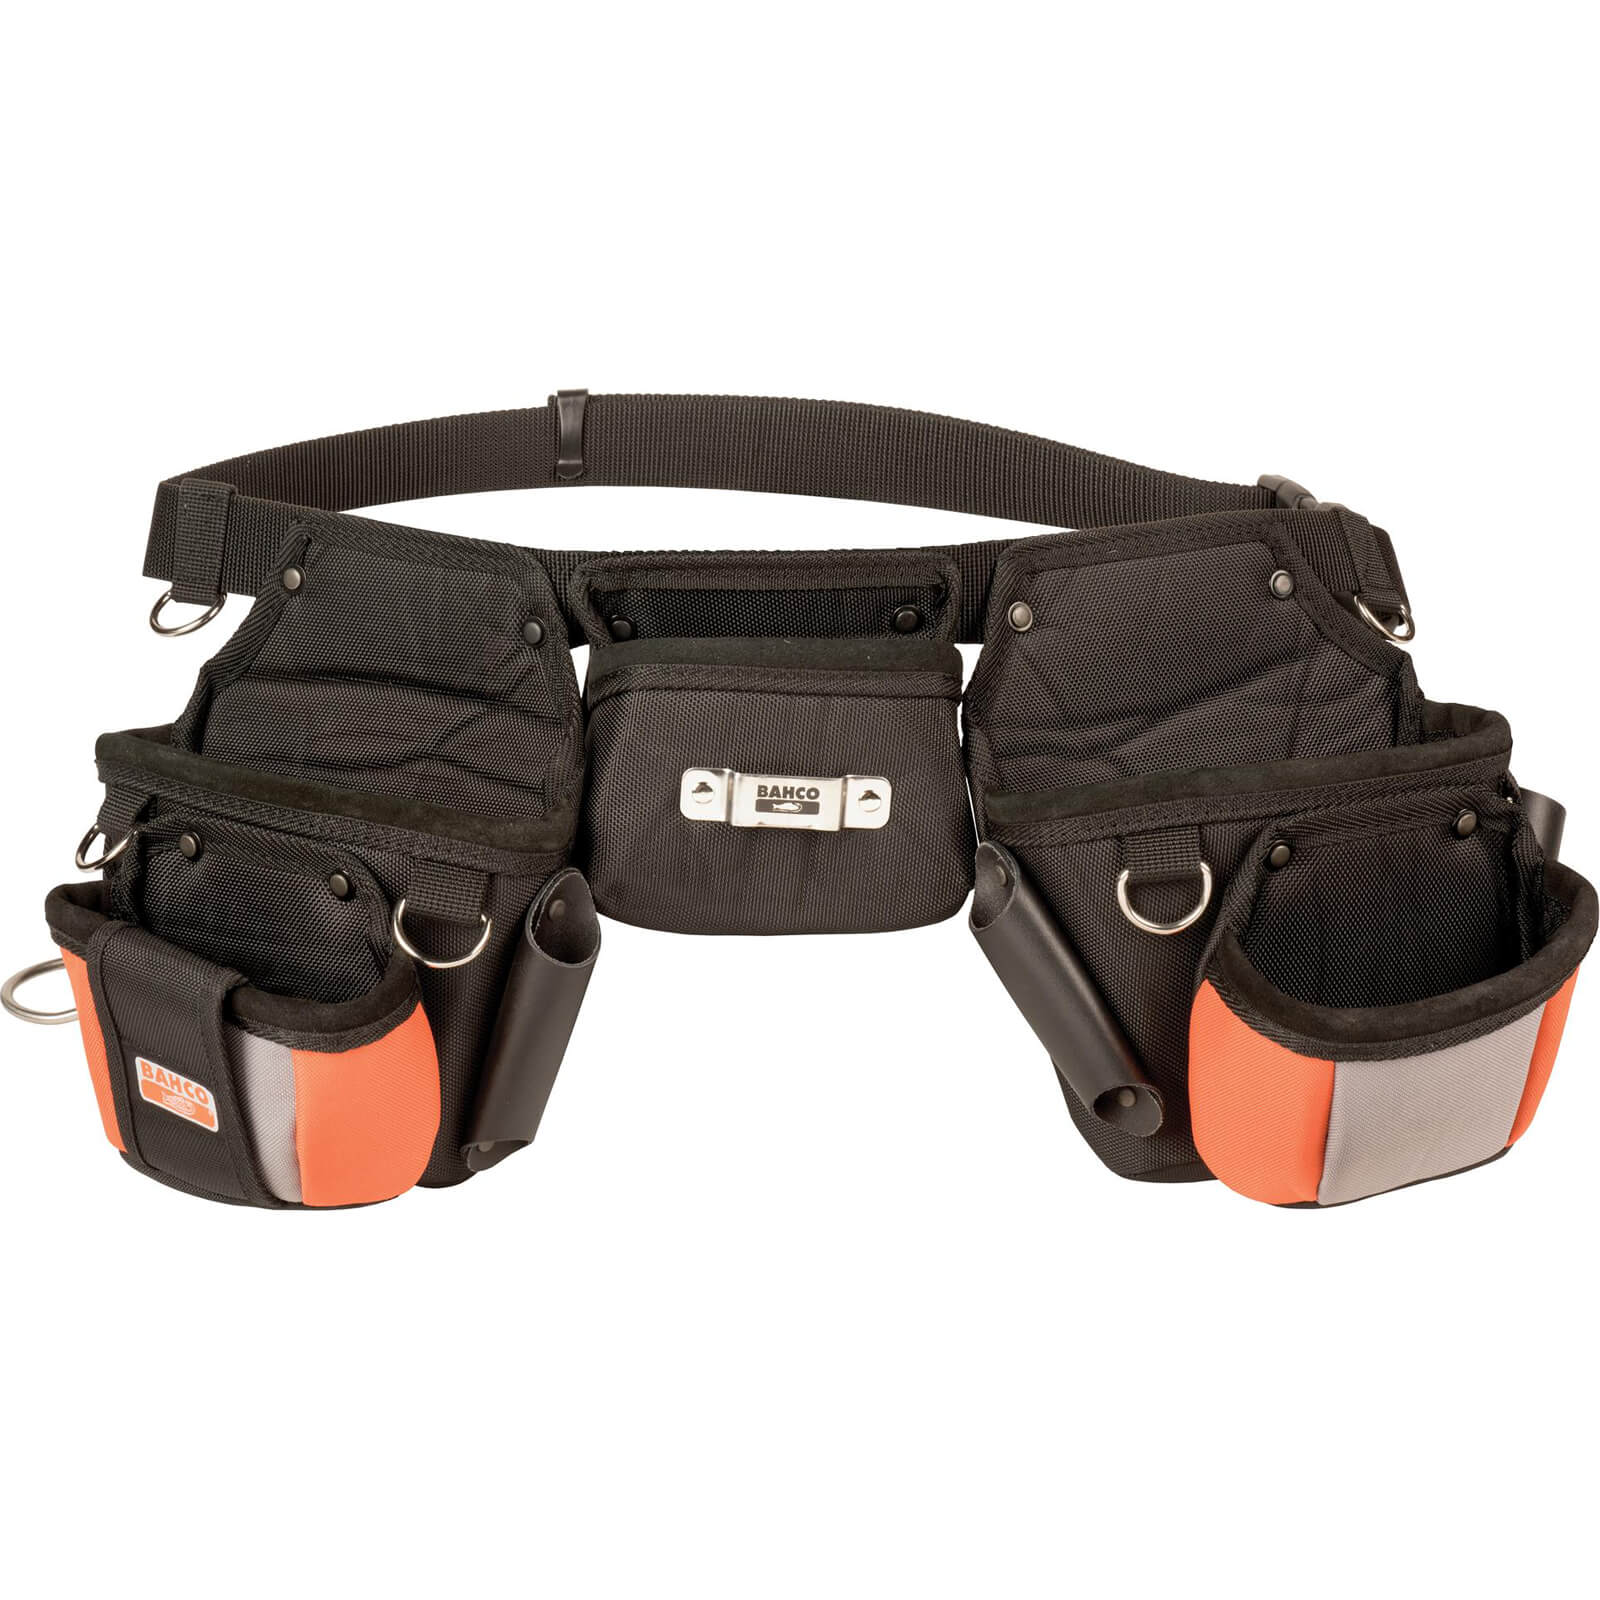 Photo of Bahco 3 Pouches Tool Belt